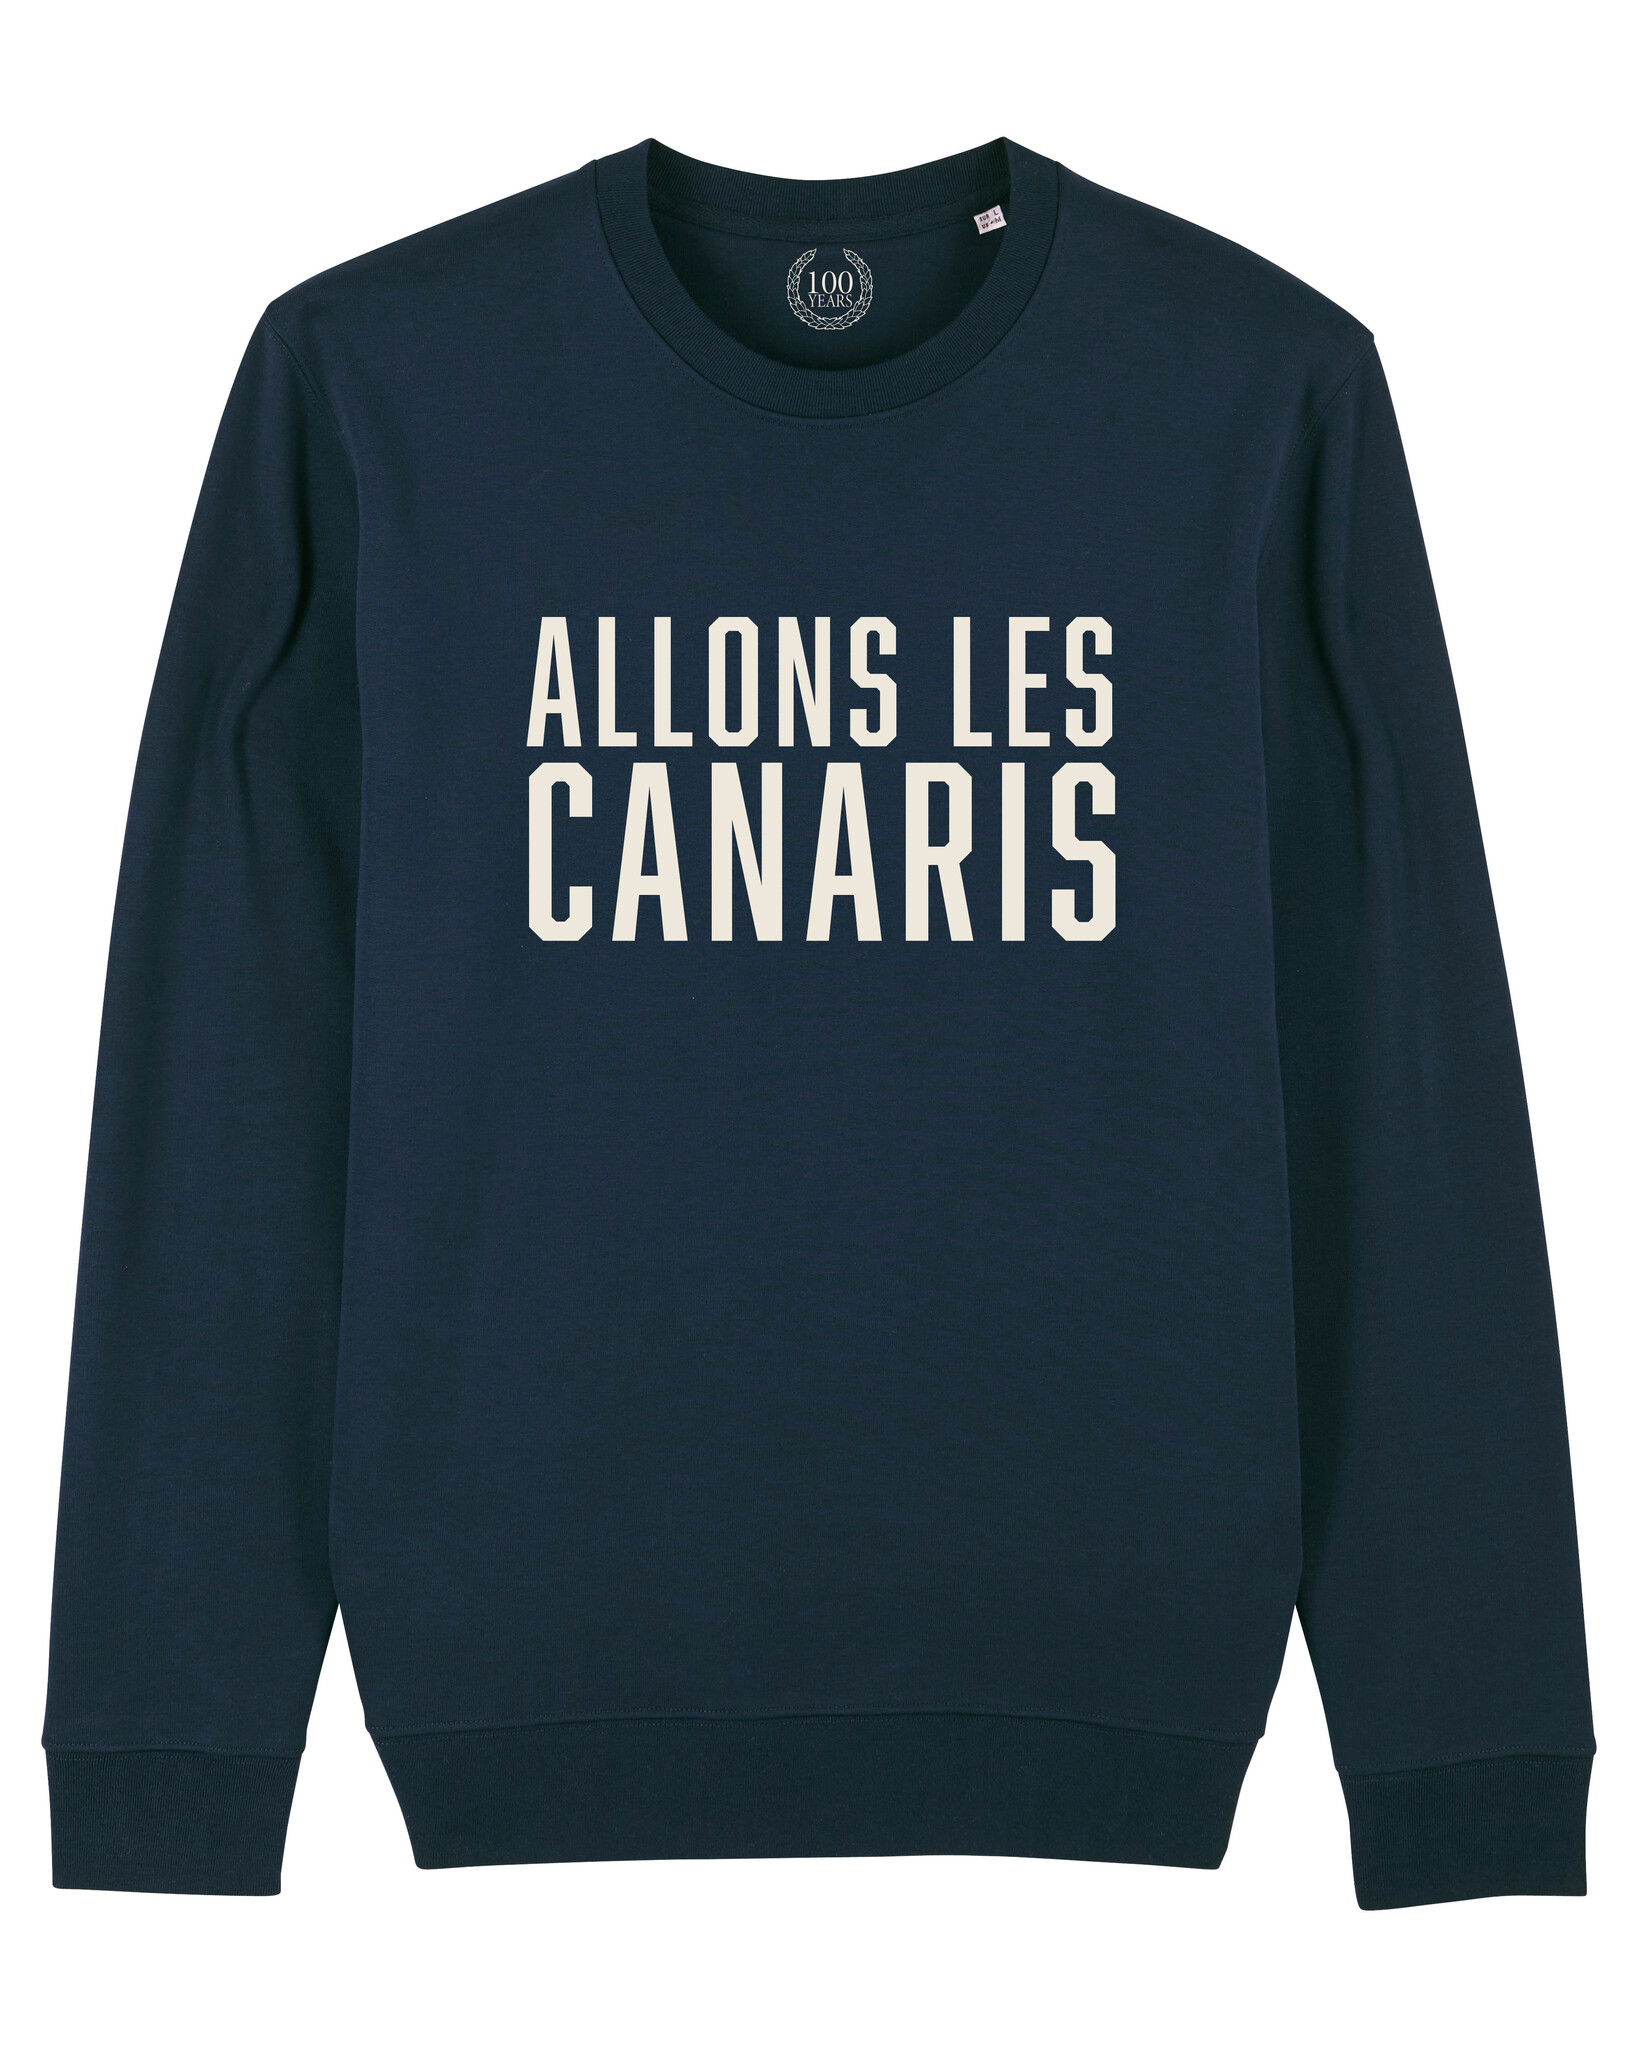 Topfanz Sweater French navy - Allons les Canaris